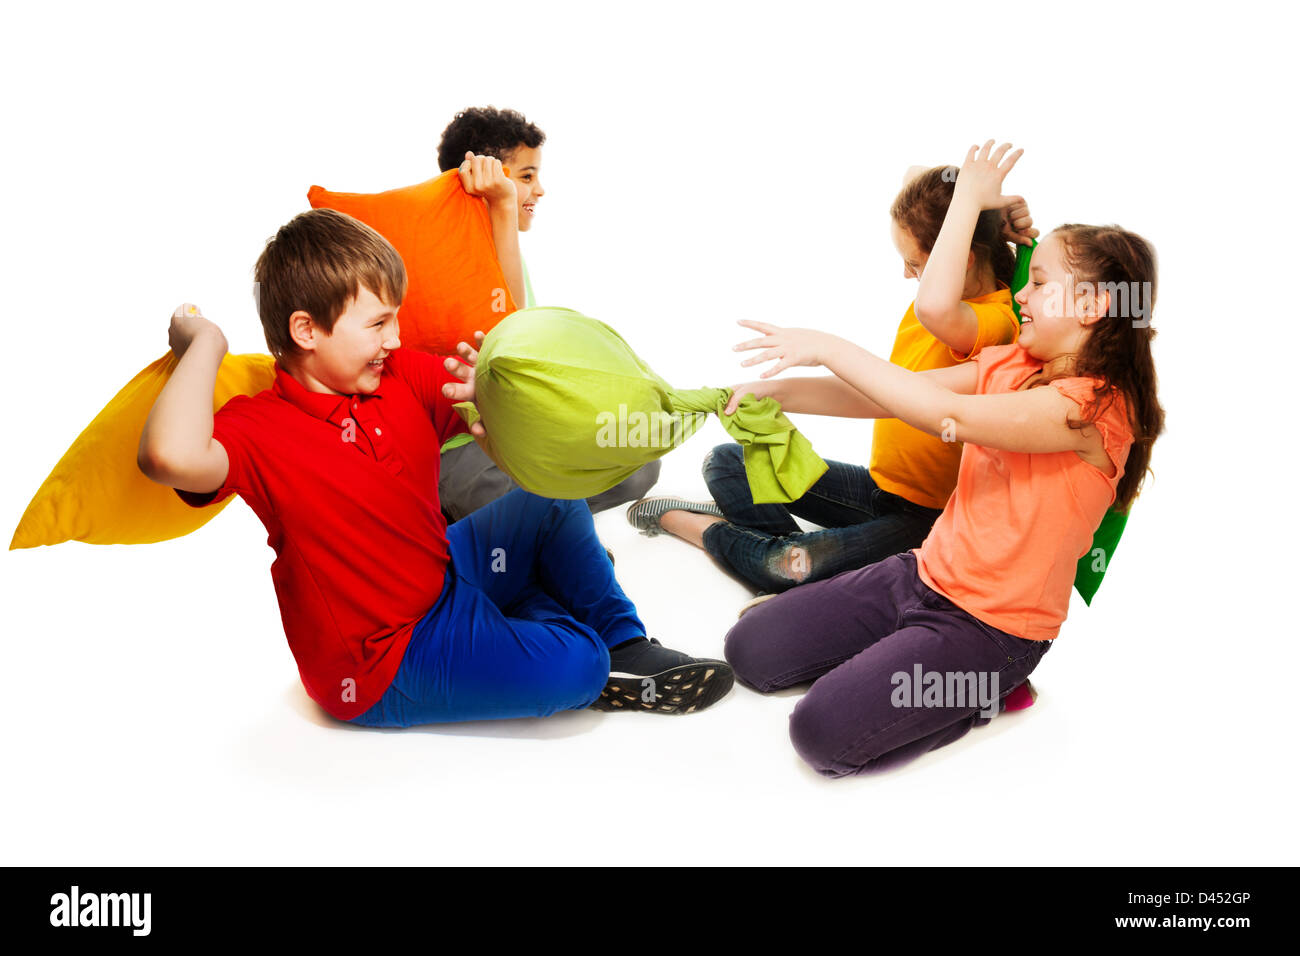 Cute four teen kids, boys and girls fighting with pillows, laughing and having fun, isolated on white Stock Photo